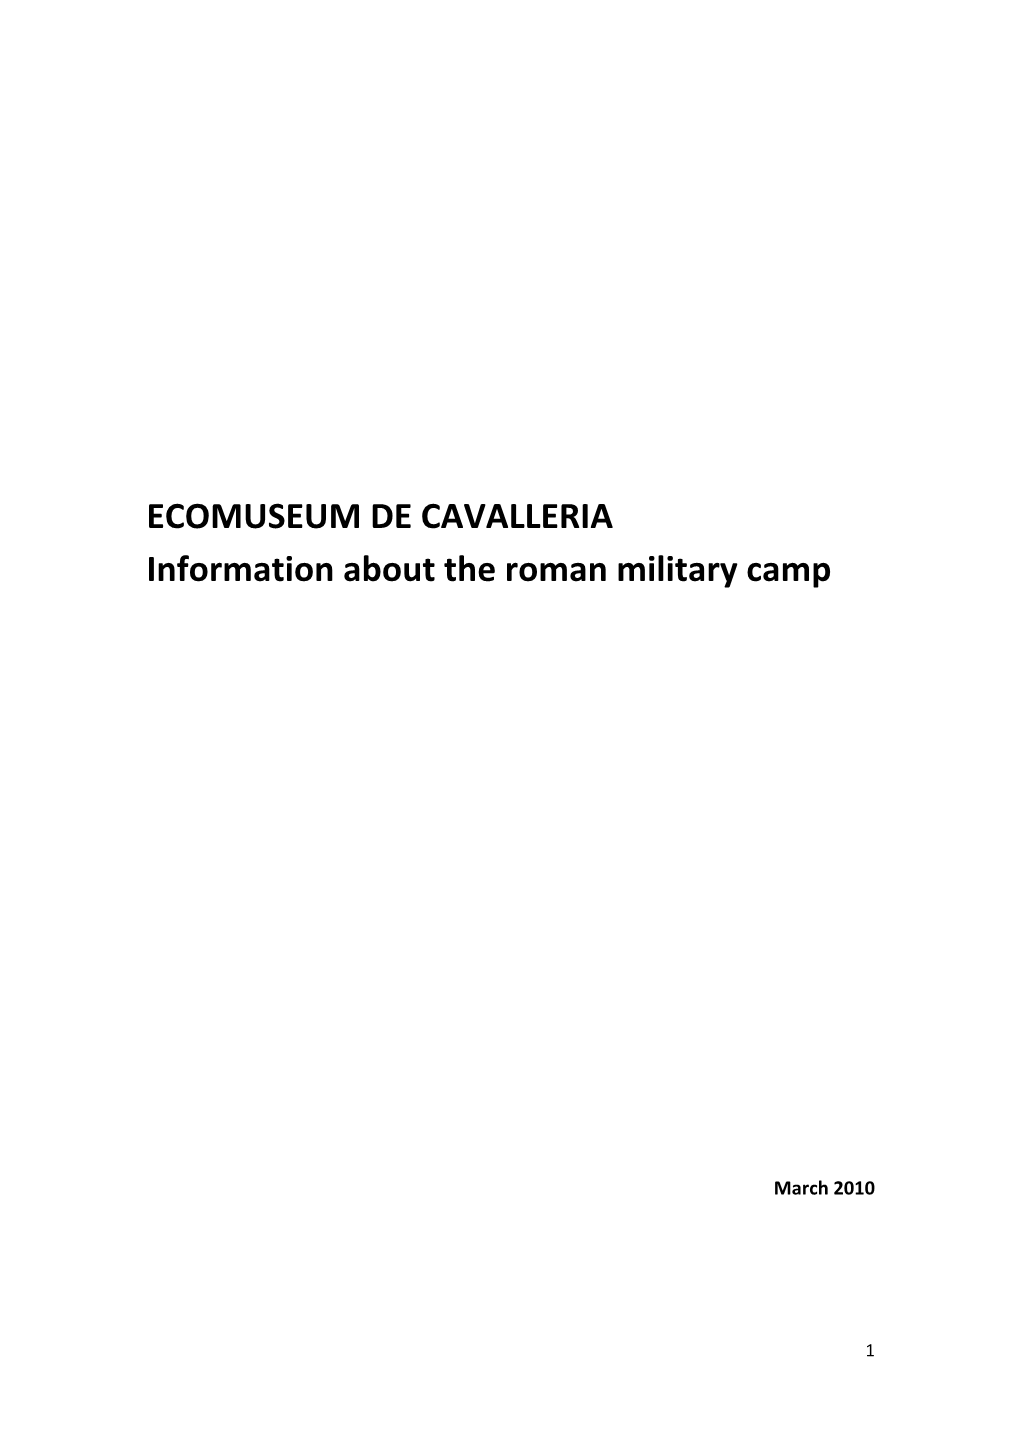 Information About the Roman Military Camp